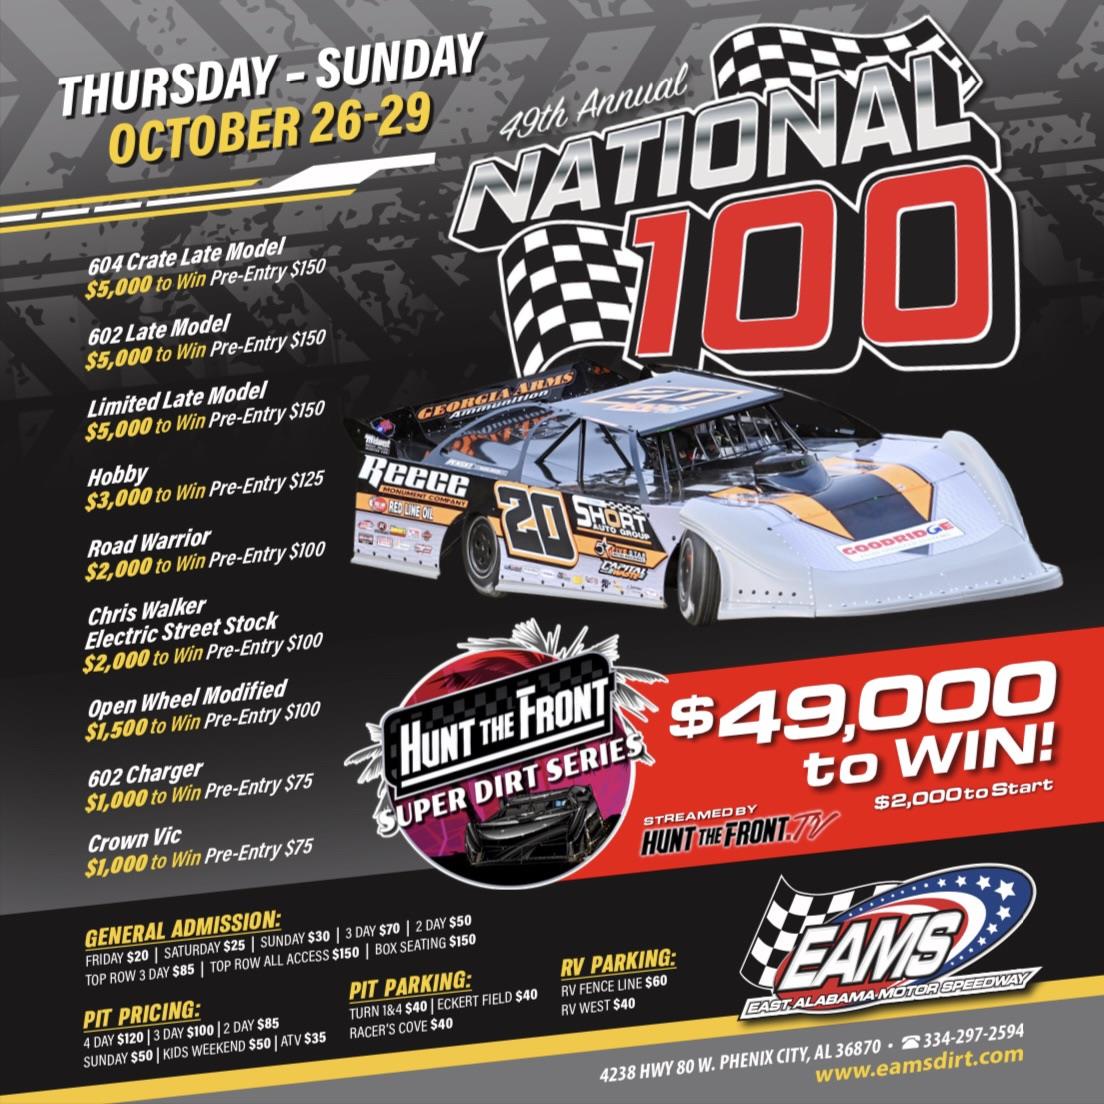 49th Annual National 100 - $49,000 to win Super Late Model